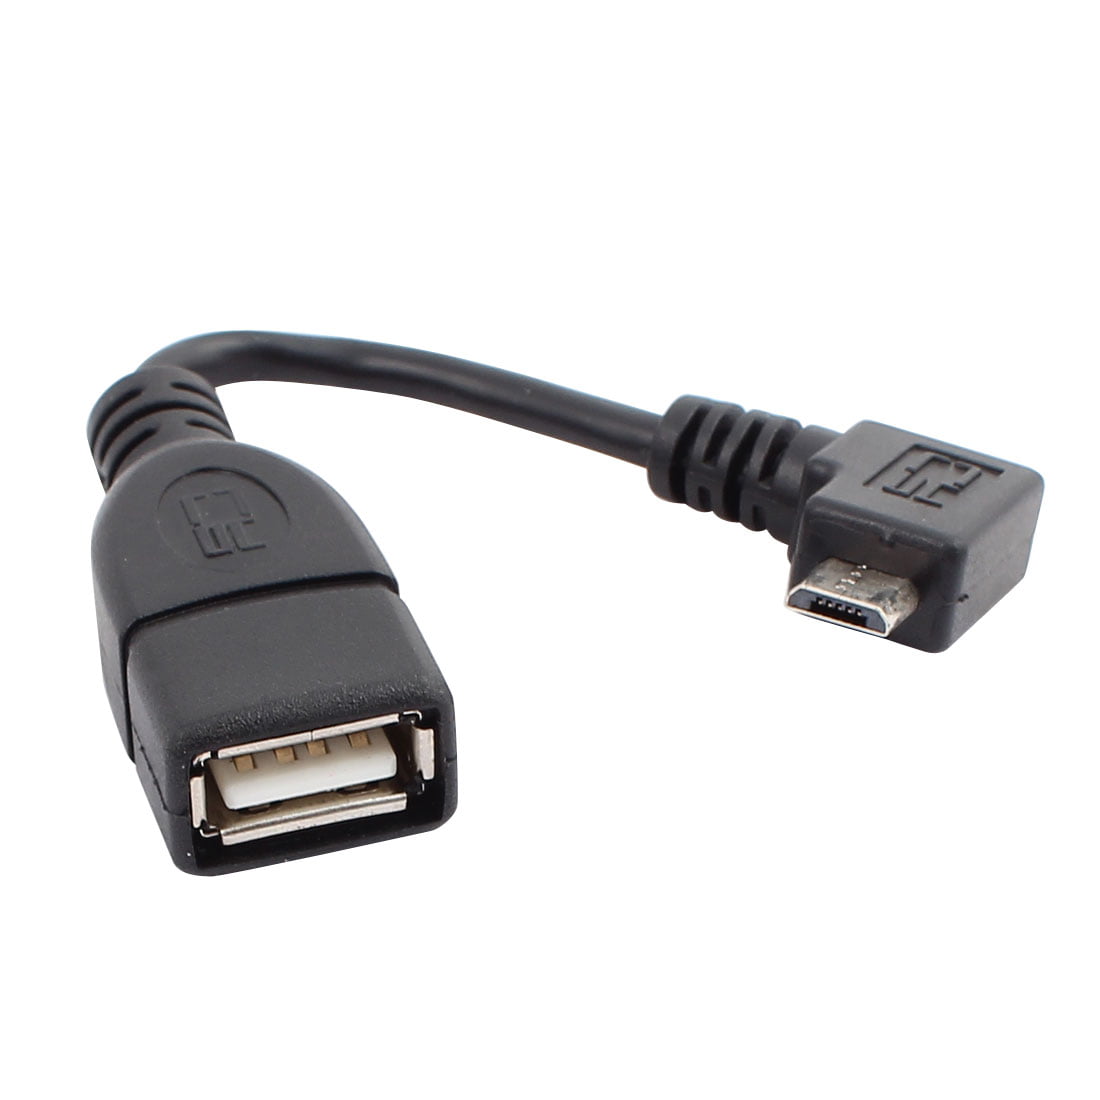 Mini 5 Pin USB Male Right Angle To USB 2.0 A Female Jack OTG Host Adapter Cable 